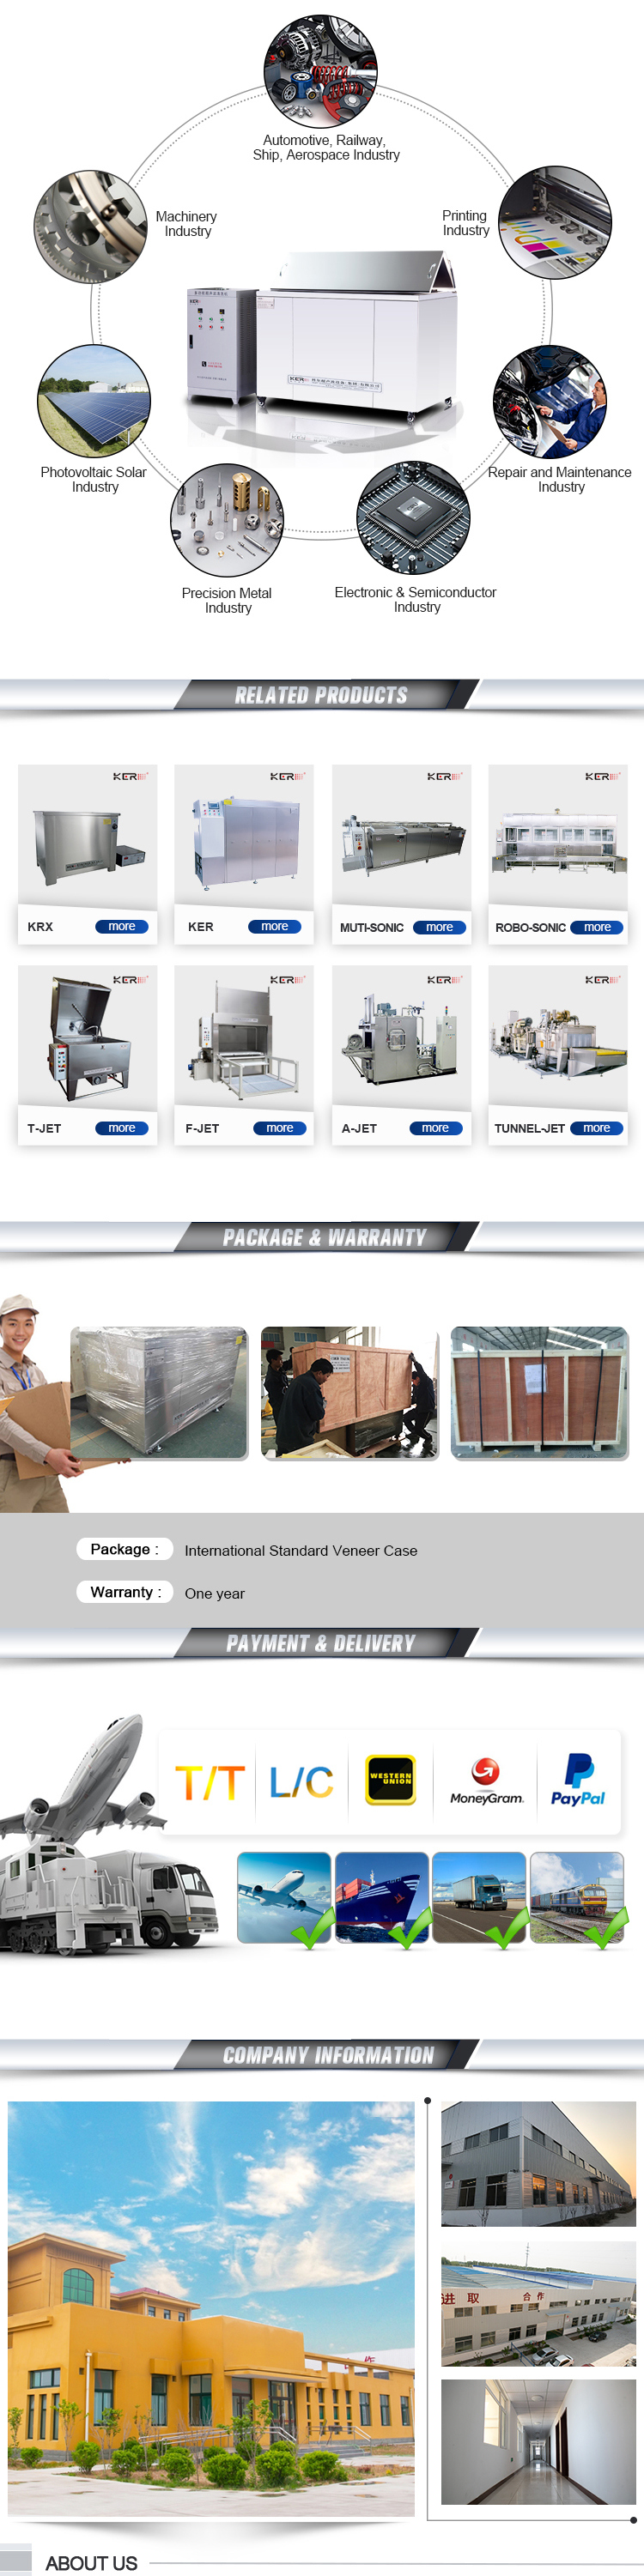 Ultrasonic Cleaning Equipment for Garage Workshops Parts Washing Degreasing